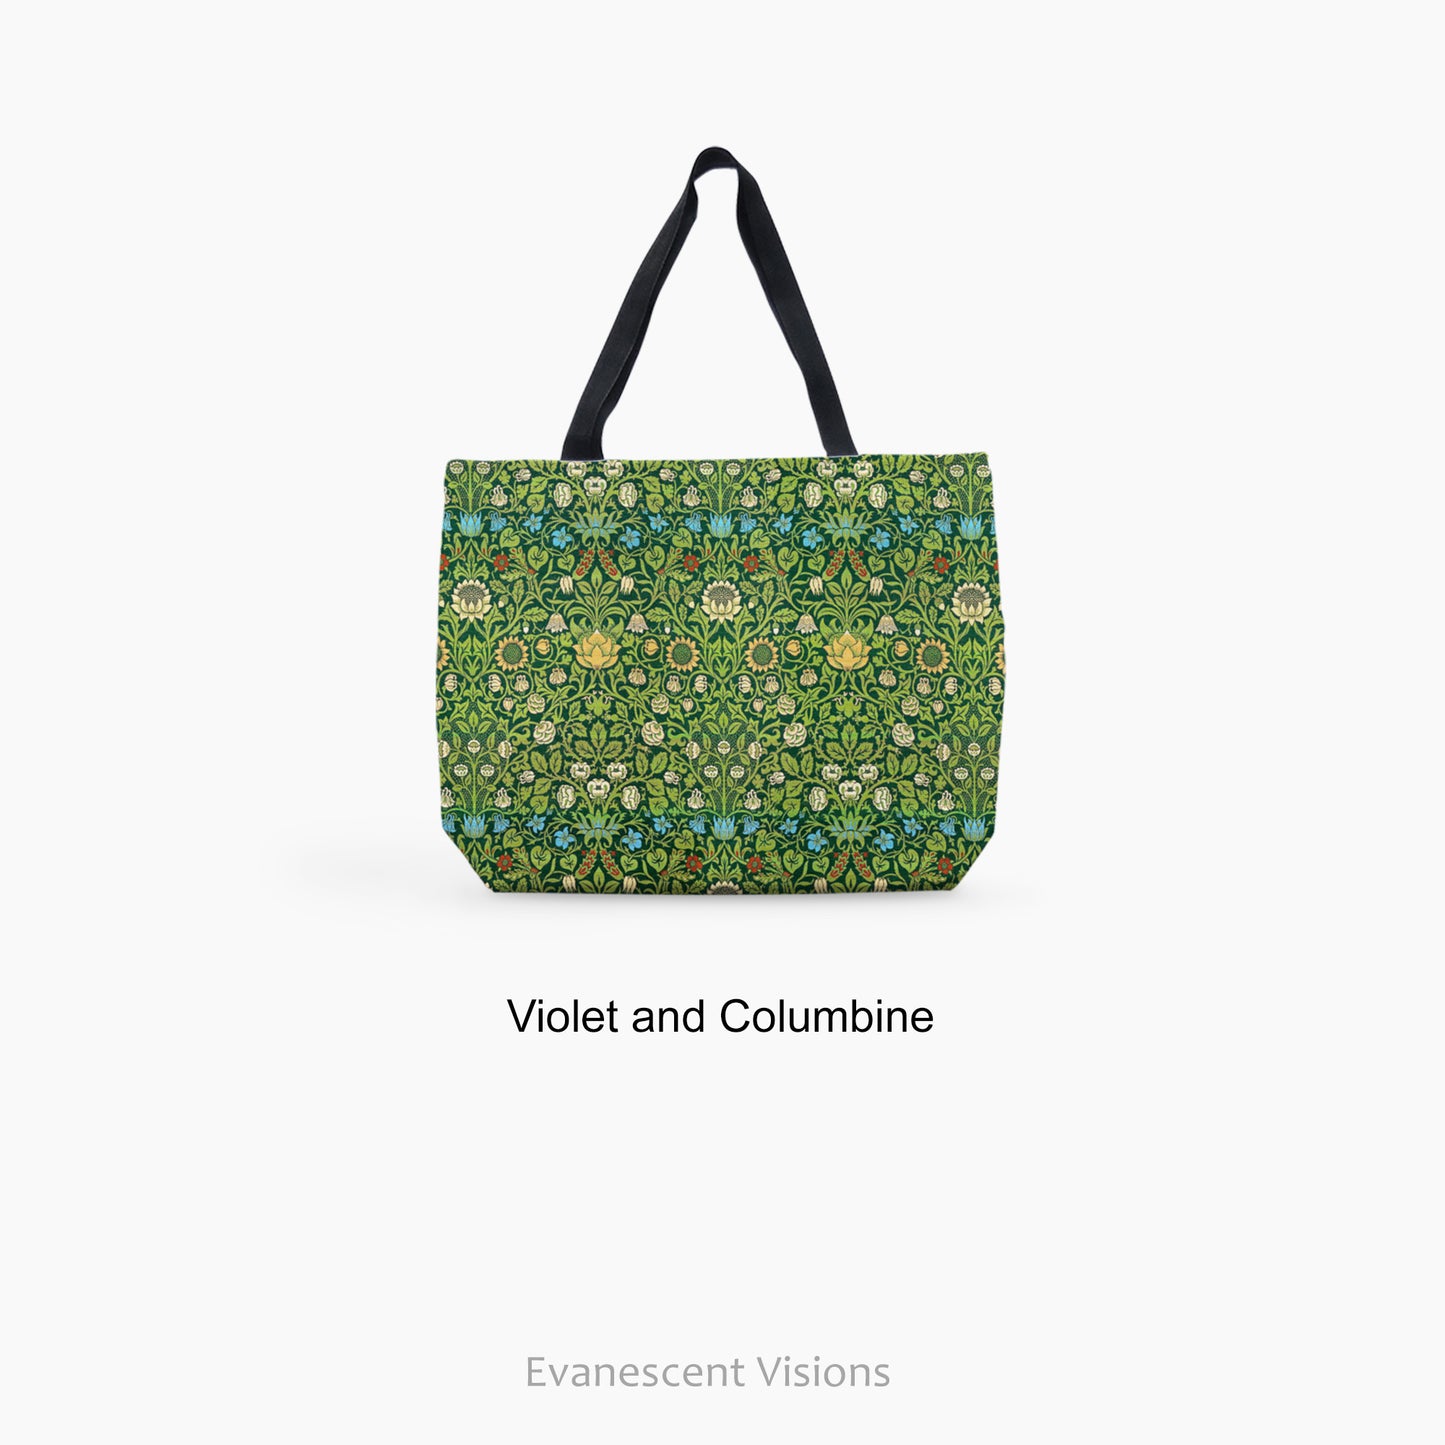 William Morris Patterned Large Tote Bag with the Violet and Columbine design option